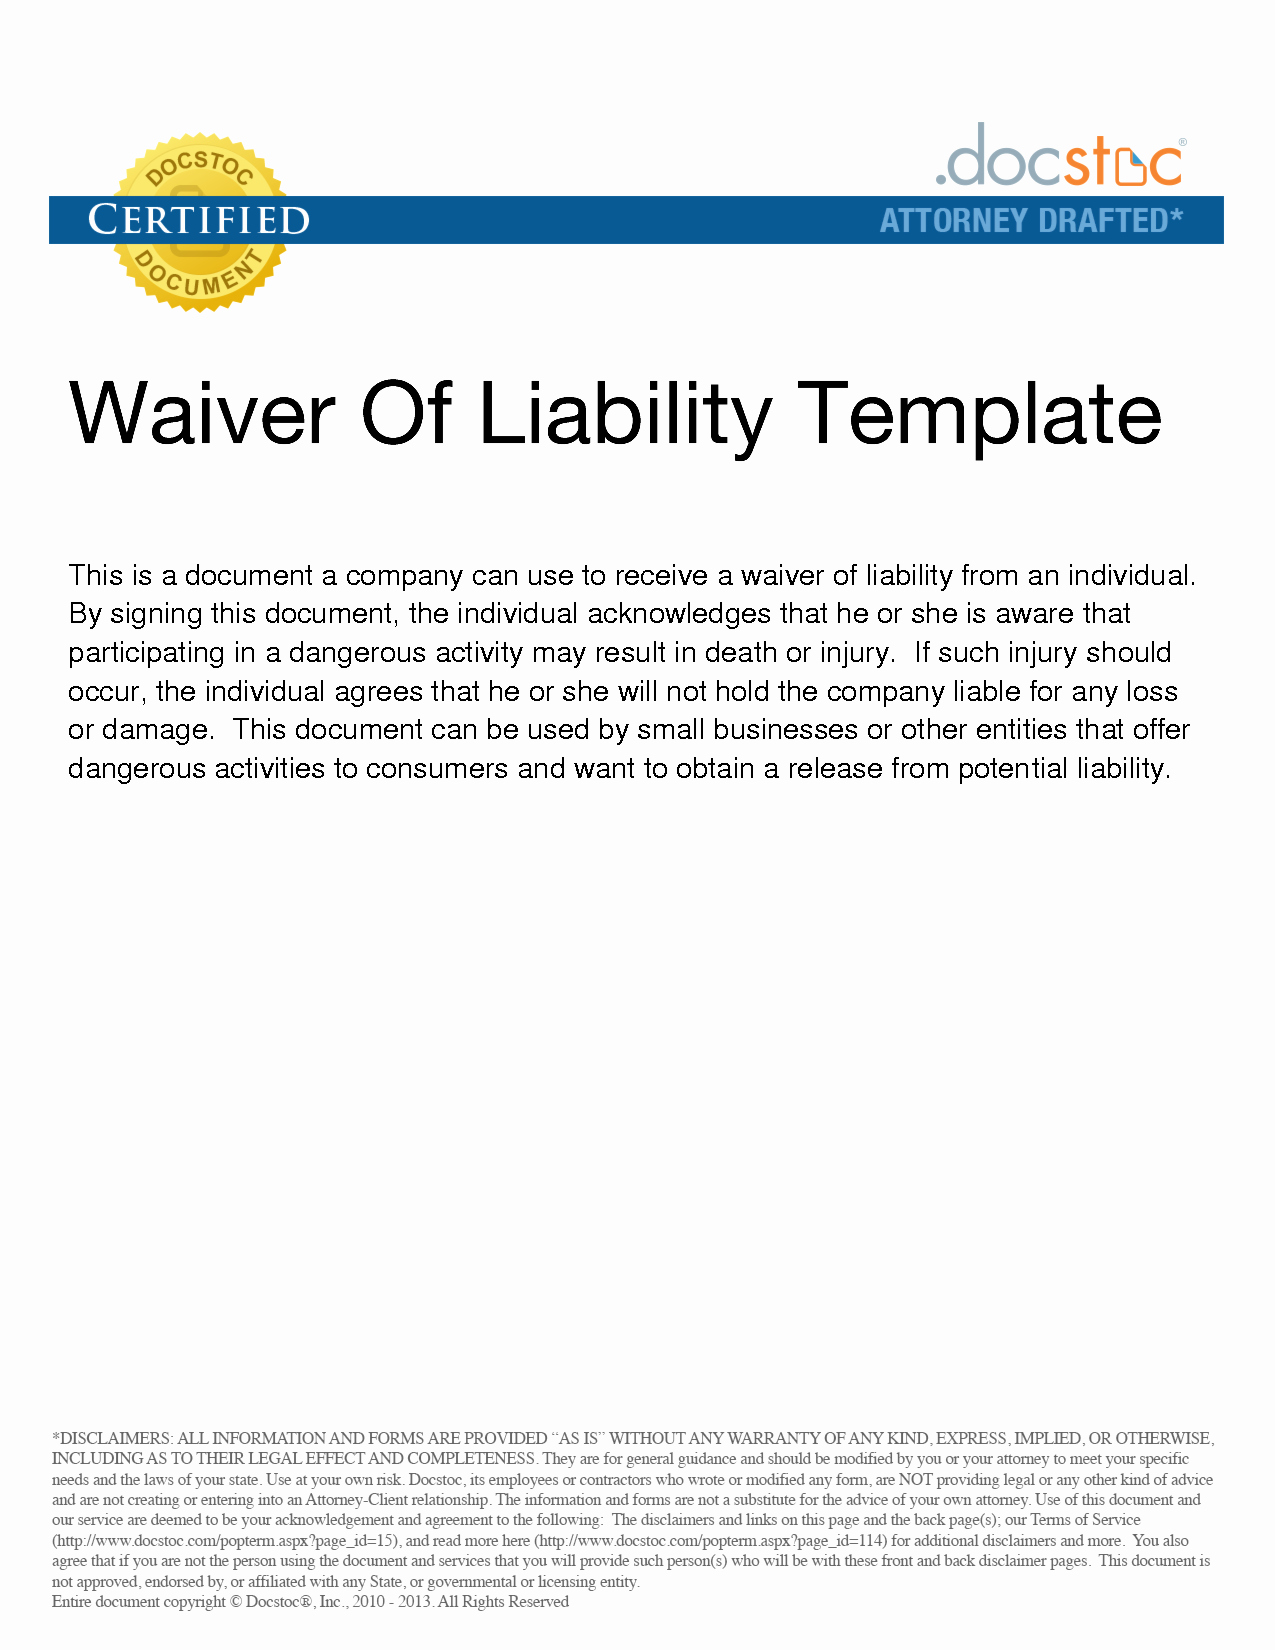 Release Of Liability Example Fresh Liability Disclaimer Examples Free Printable Documents